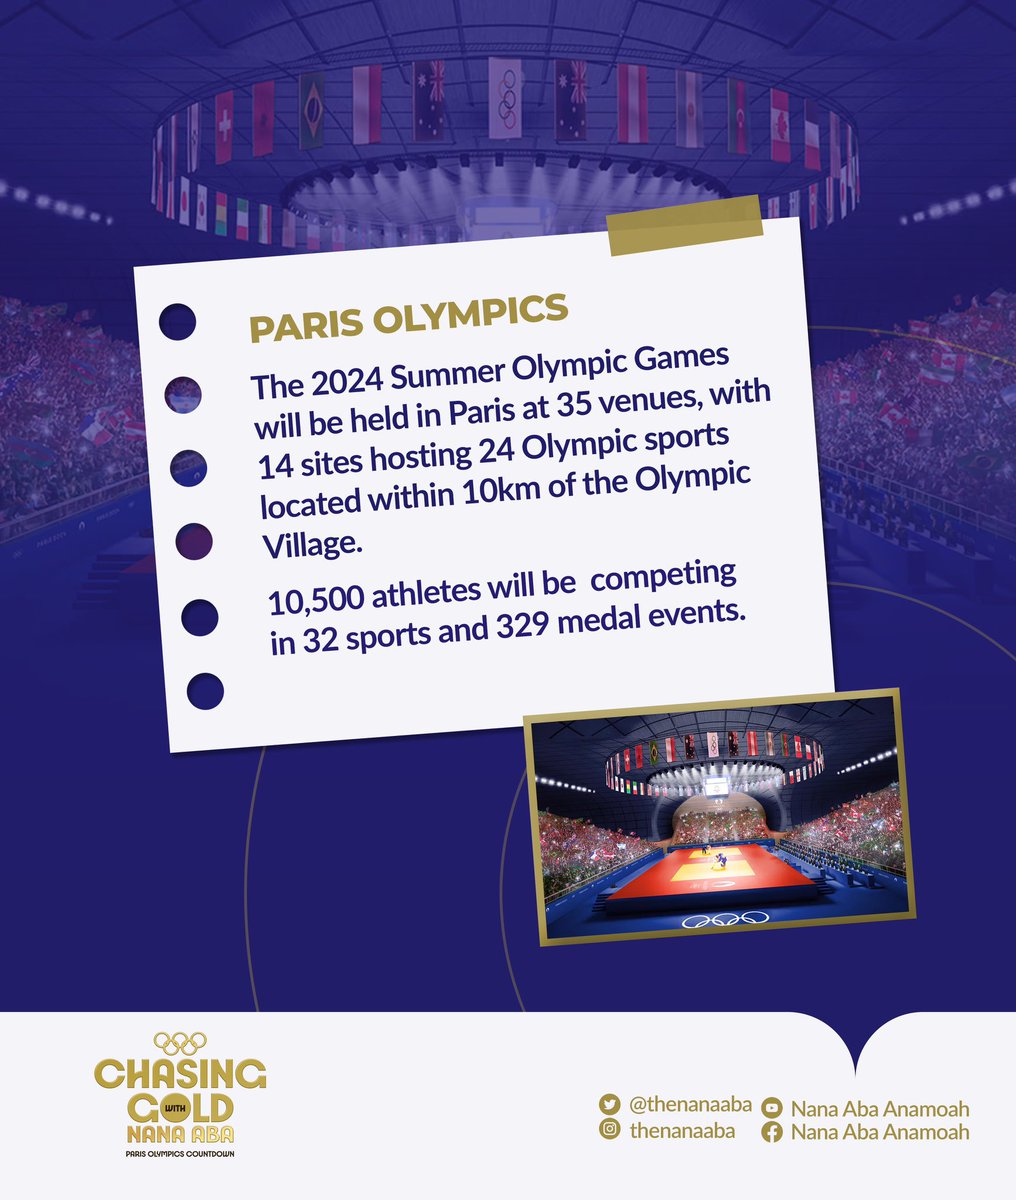 Here’s what you need to know about this year’s Summer Olympic Games in Paris. The Olympic Games will be held in Paris at 35 venues with 10,500 athletes participating. I hope my country gets 50 medals lol 🥇🇫🇷 #ChasingGoldWithNanaAba